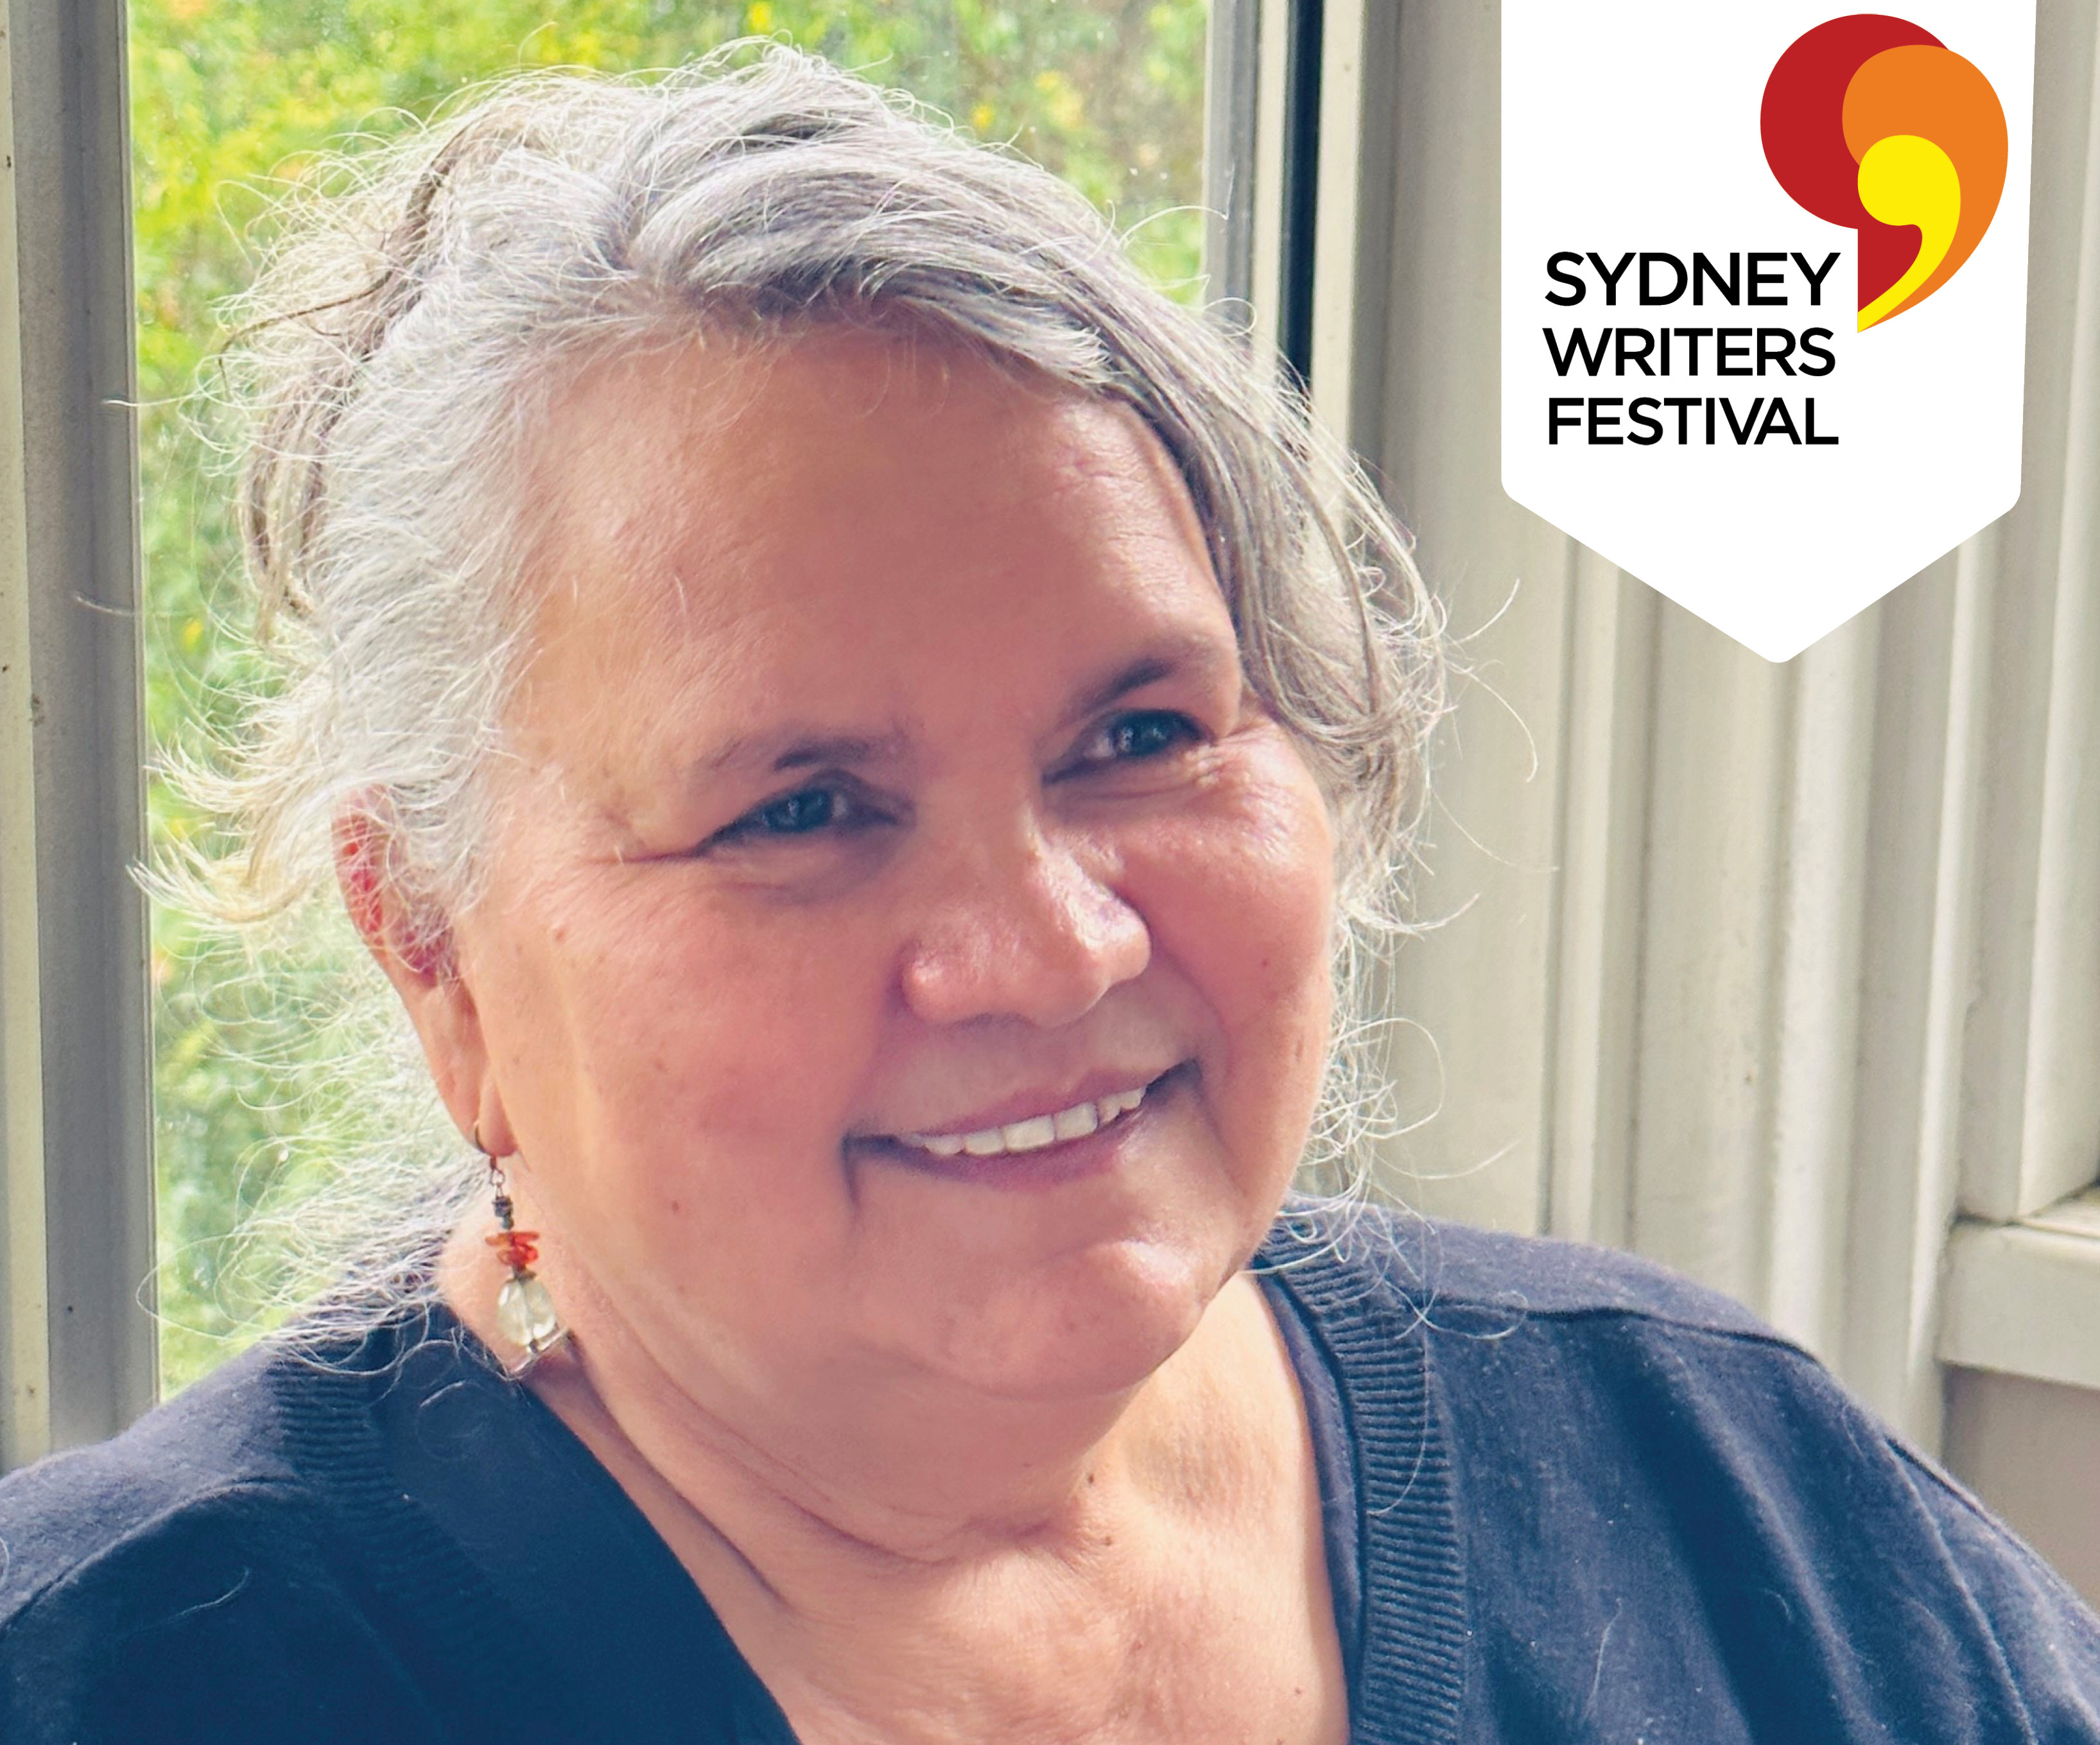 An 'In Your Neighbourhood' Sydney Writers' Festival event. Against the backdrop of Gundanji country, Debra Dank pieces together a deeply personal and profound tribute to family and country in We Come With This Place.